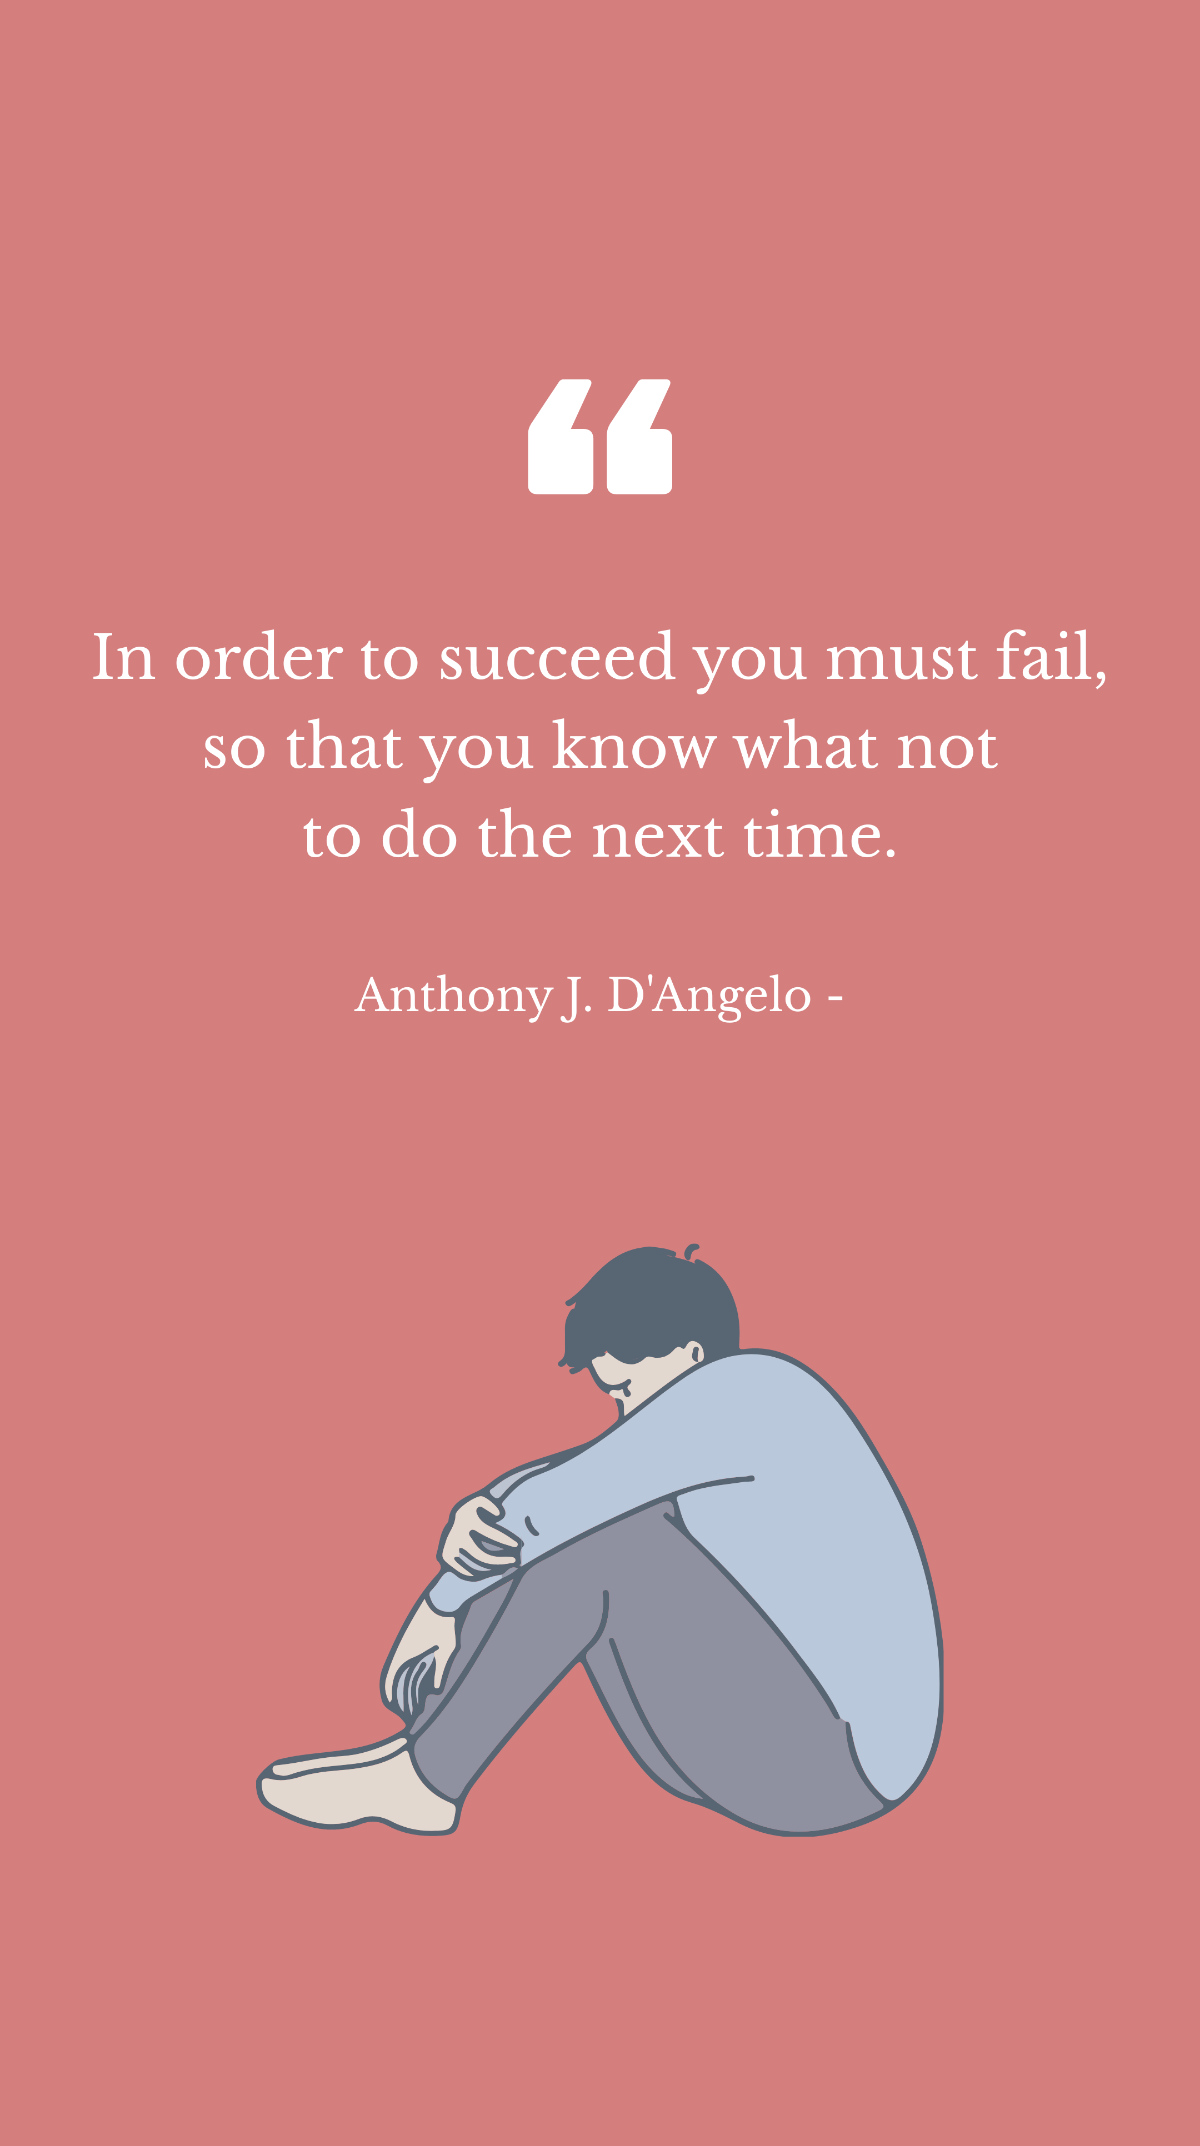 Anthony J. D'Angelo -  In order to succeed you must fail, so that you know what not to do the next time. Template